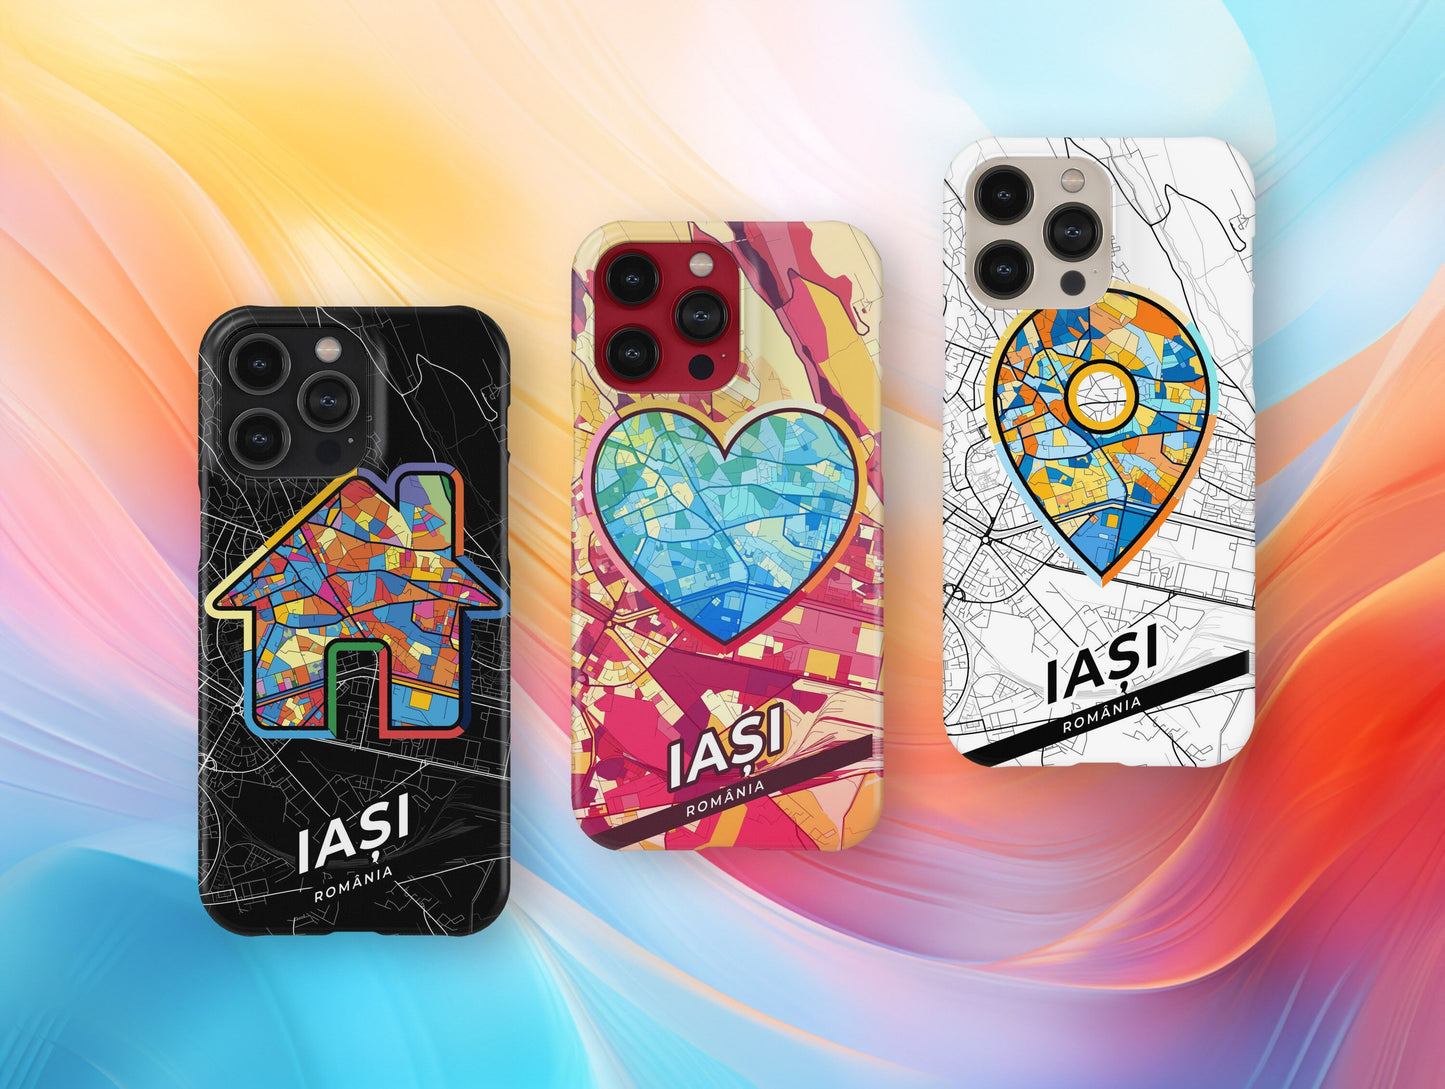 Iași Romania slim phone case with colorful icon. Birthday, wedding or housewarming gift. Couple match cases.